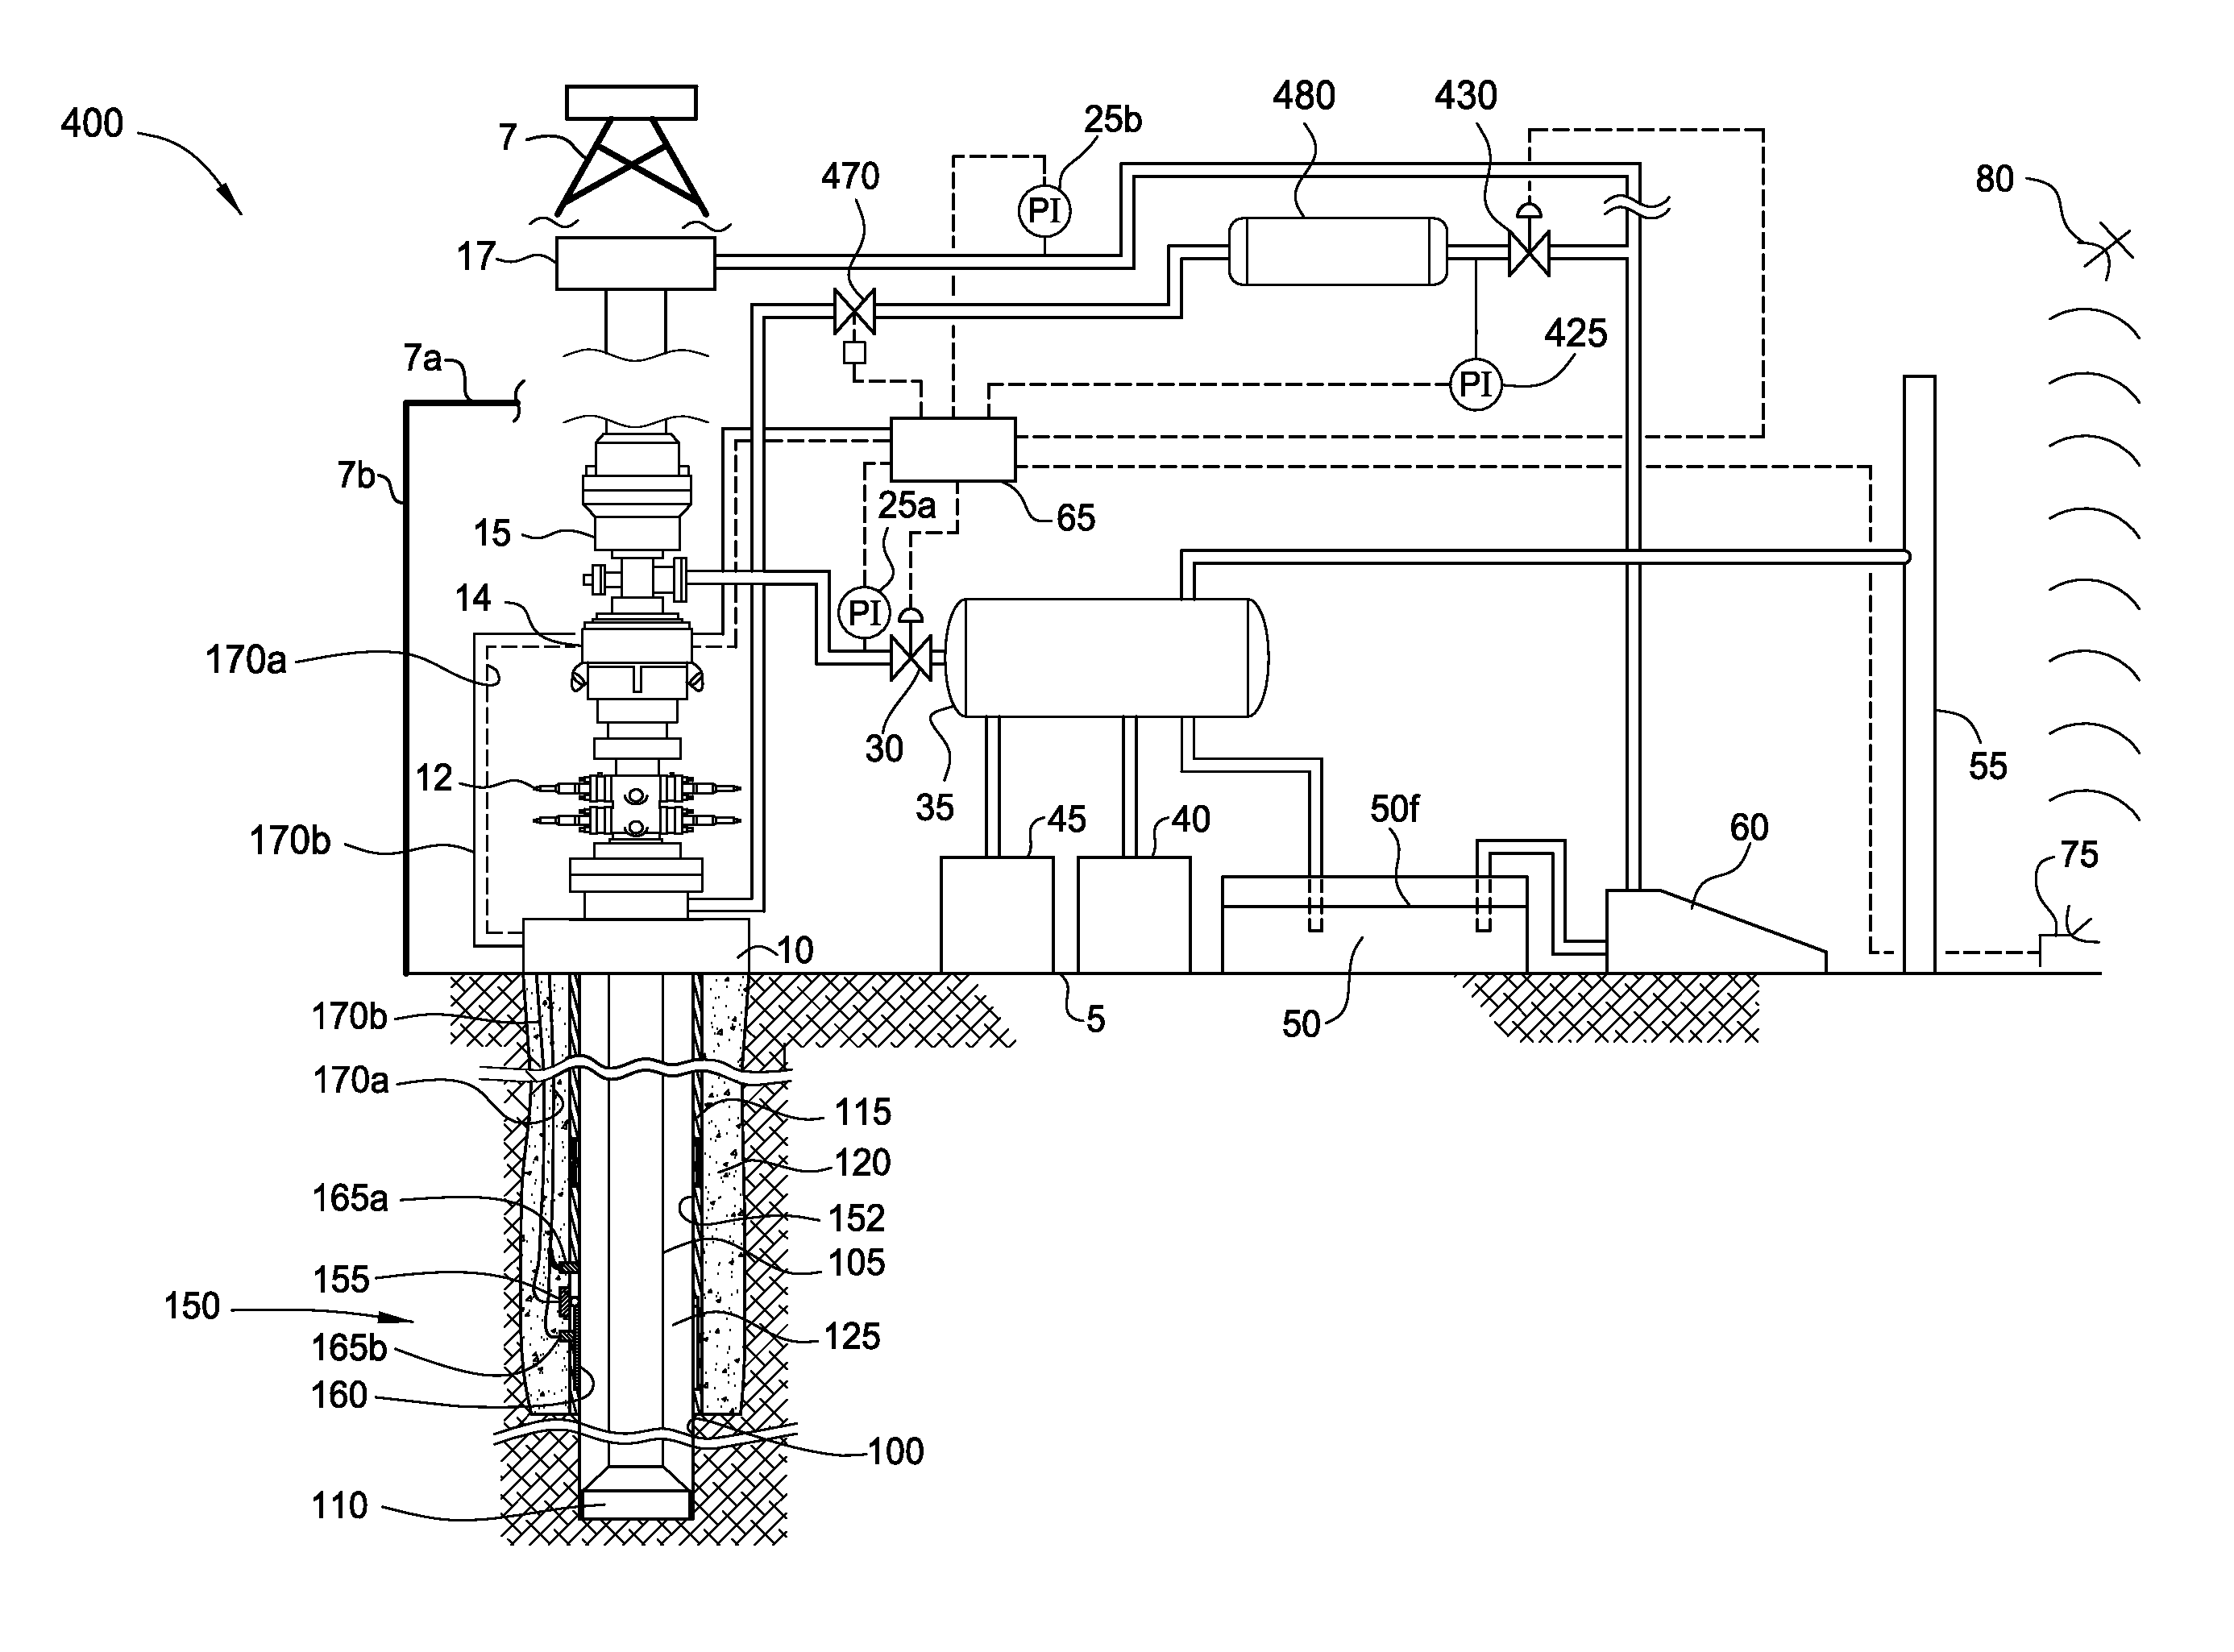 Annulus pressure control drilling systems and methods